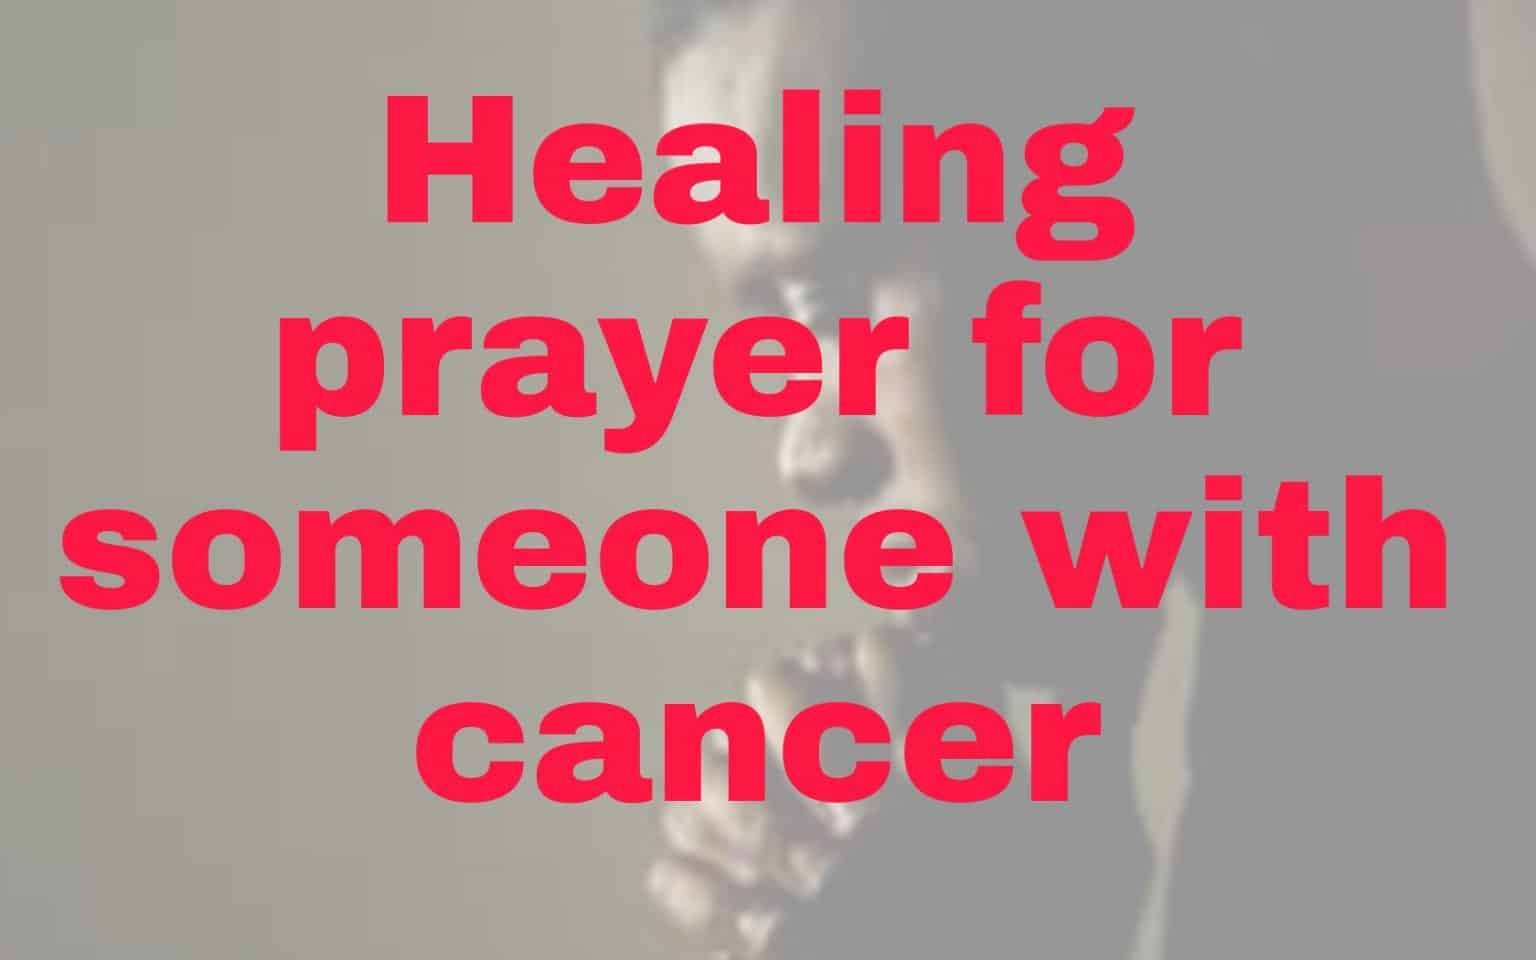 Healing prayers for someone with cancer